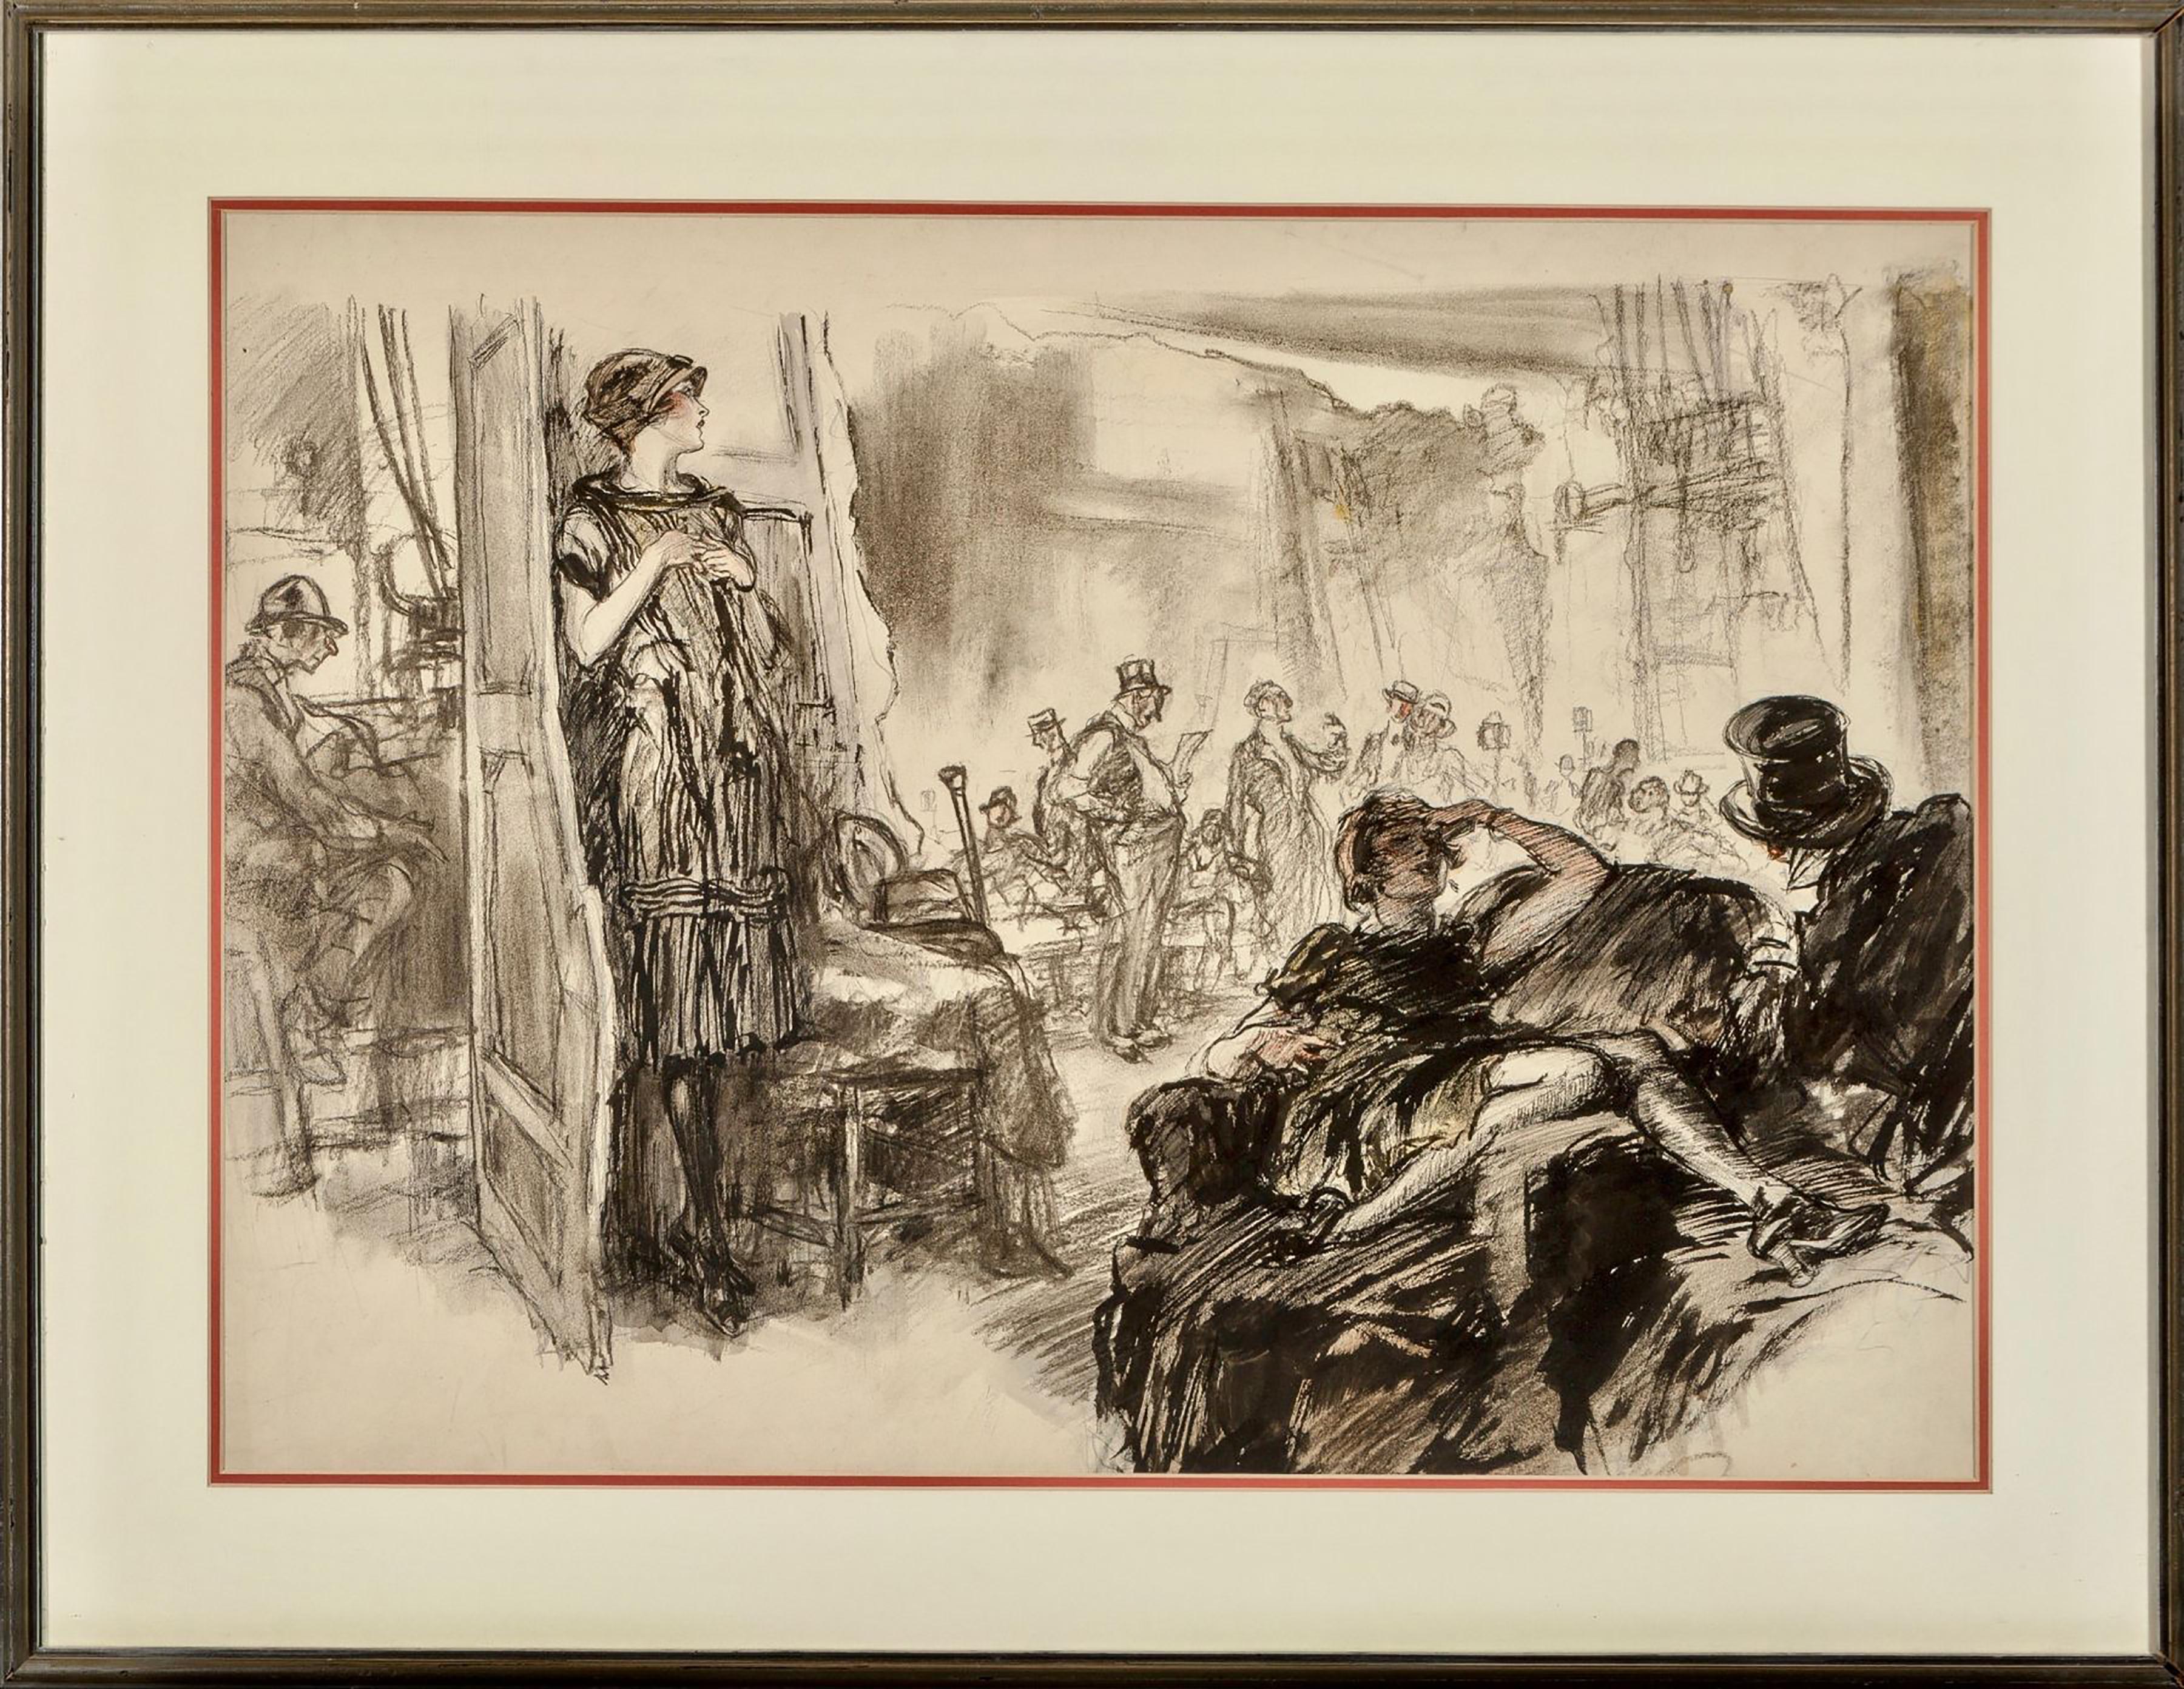 The Auction Room - Art by Henry Raleigh